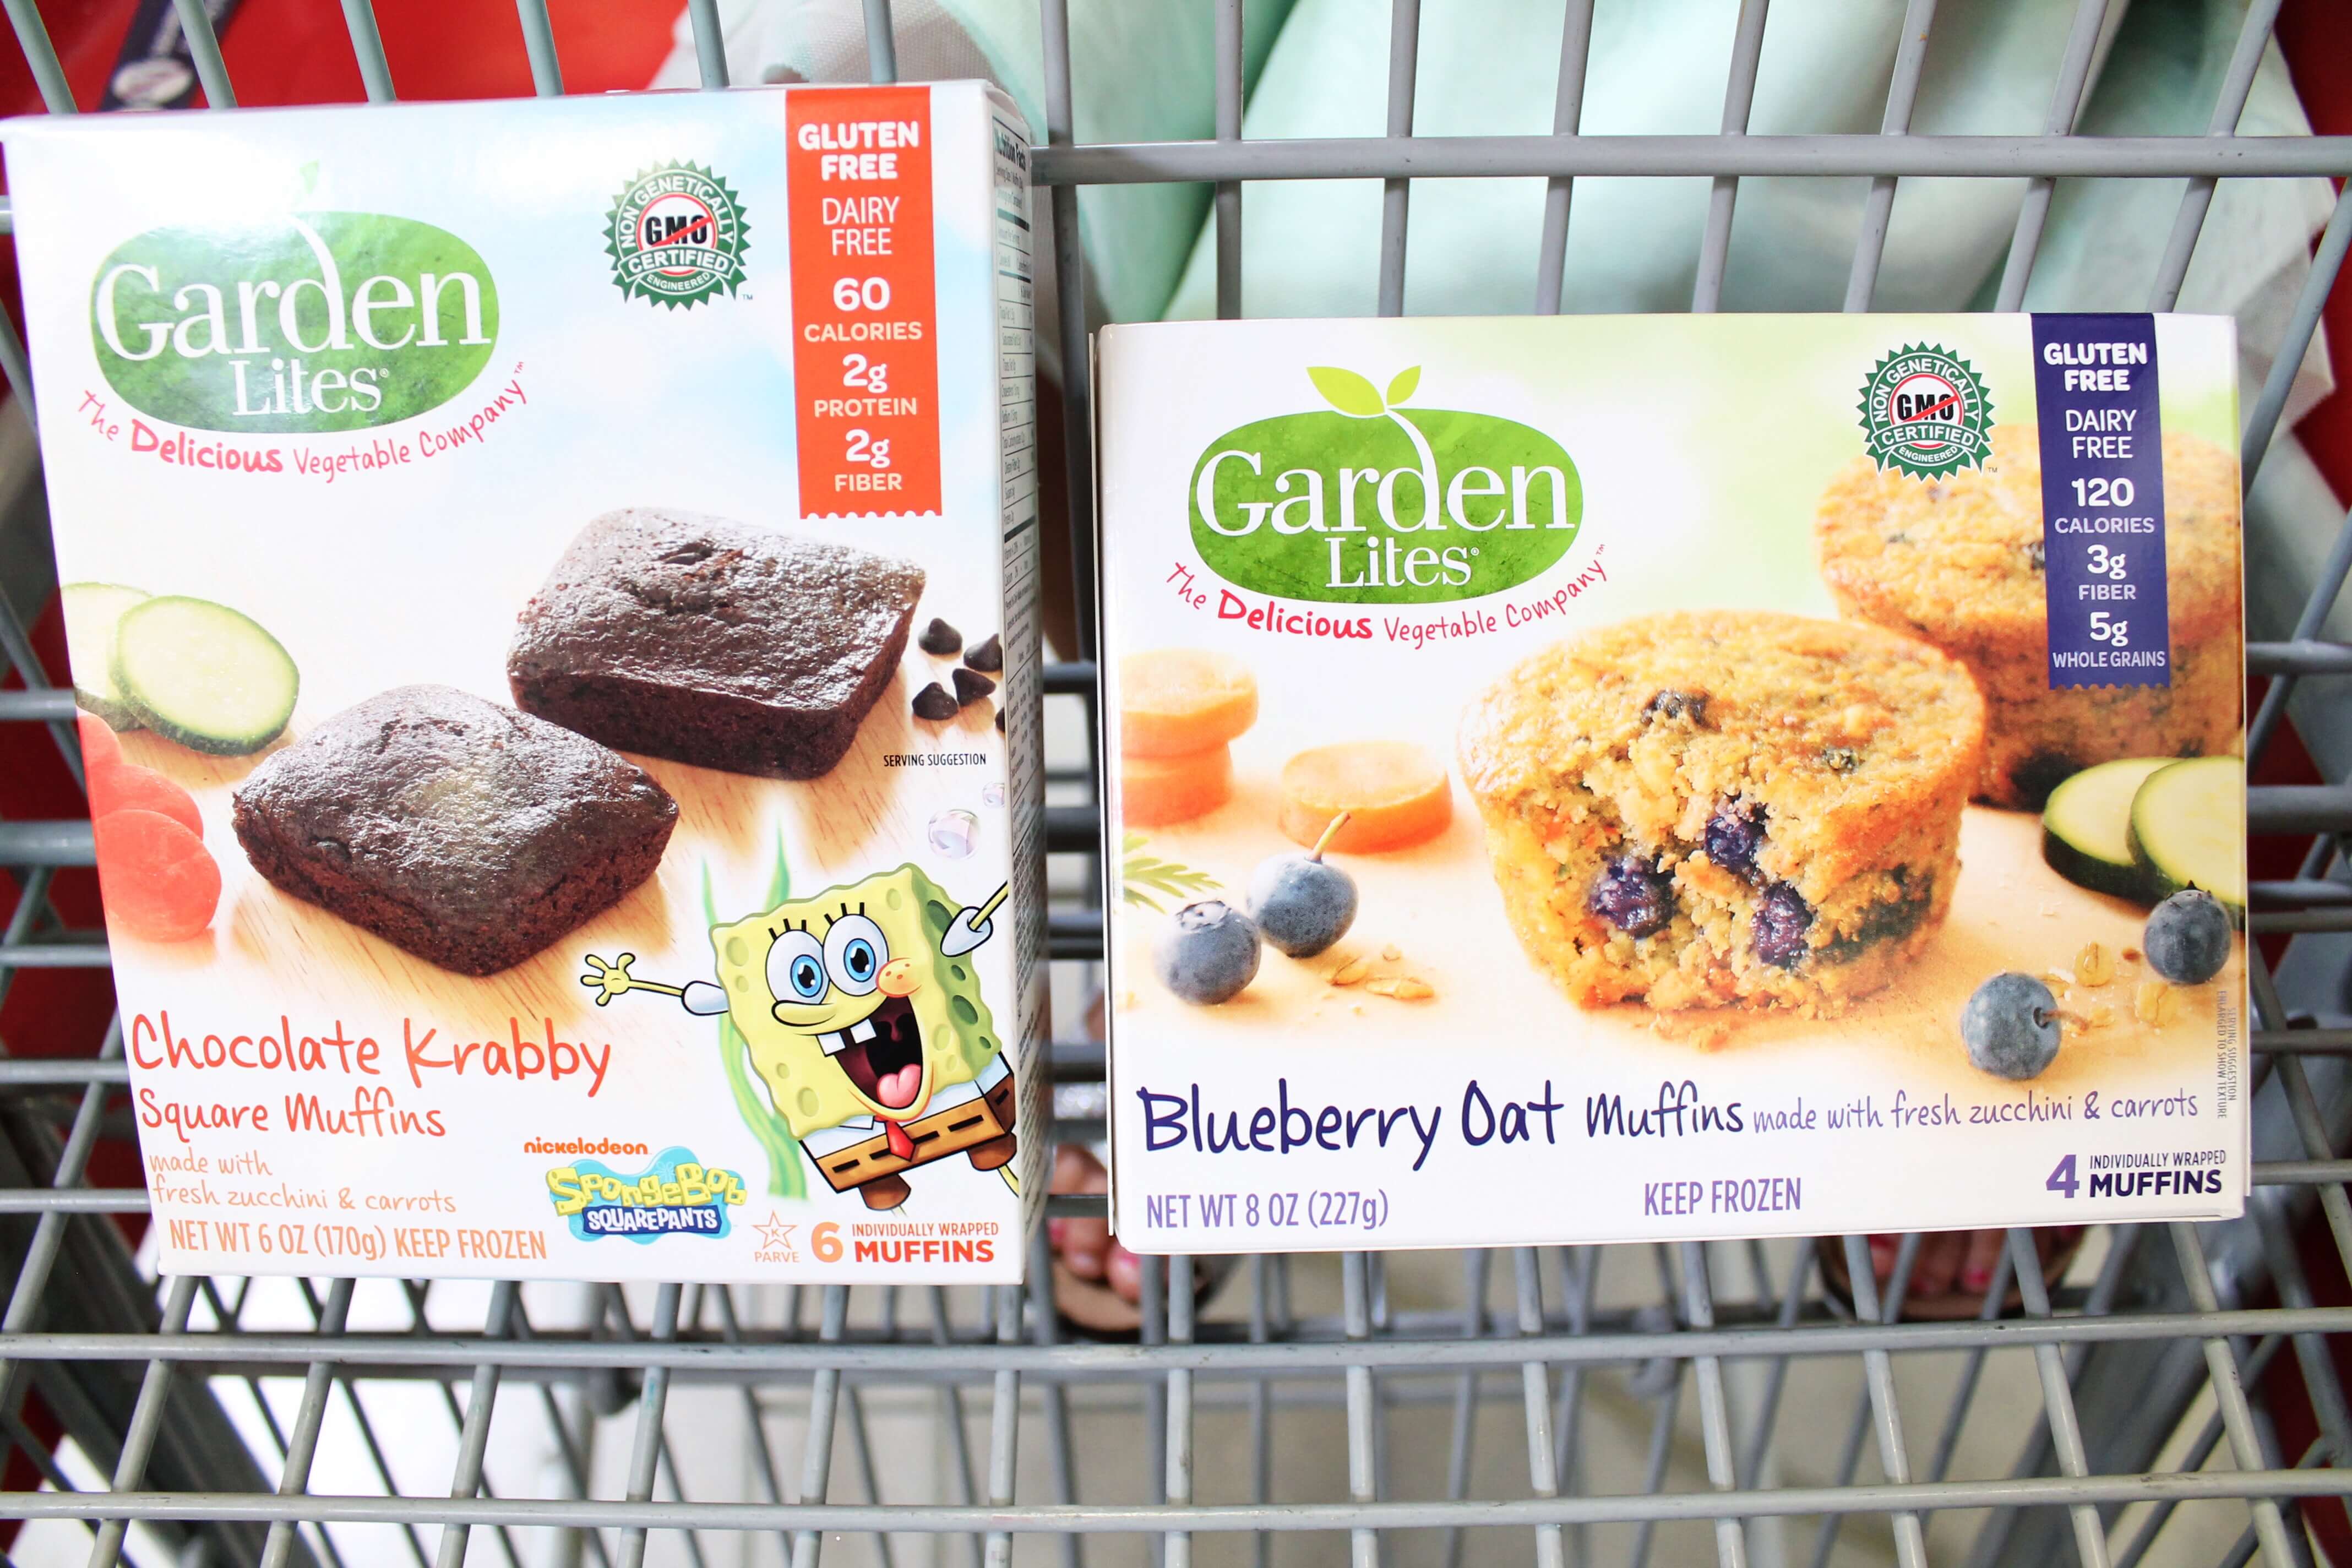 How to Get Your Kid To Eat More Vegetables. Best tips and mom hacks to get your child to eat more veggies. By moms for moms! #ad #hookedonveggies #gardenliteschallenge